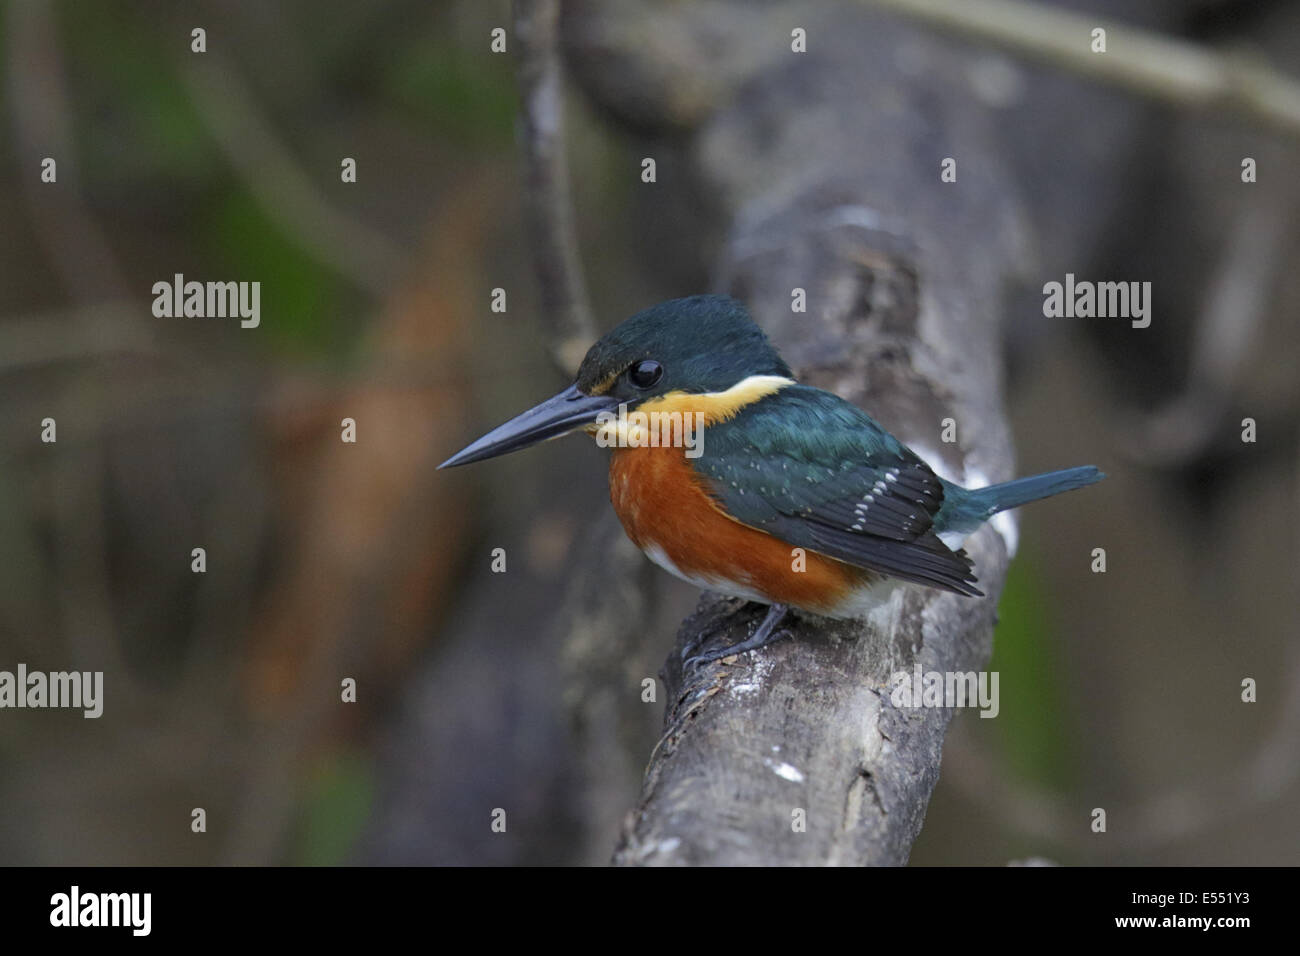 American Pygmy Kingfisher (Chloroceryle aenea) adult male, perched on branch, Cano Negro, Costa Rica, February Stock Photo